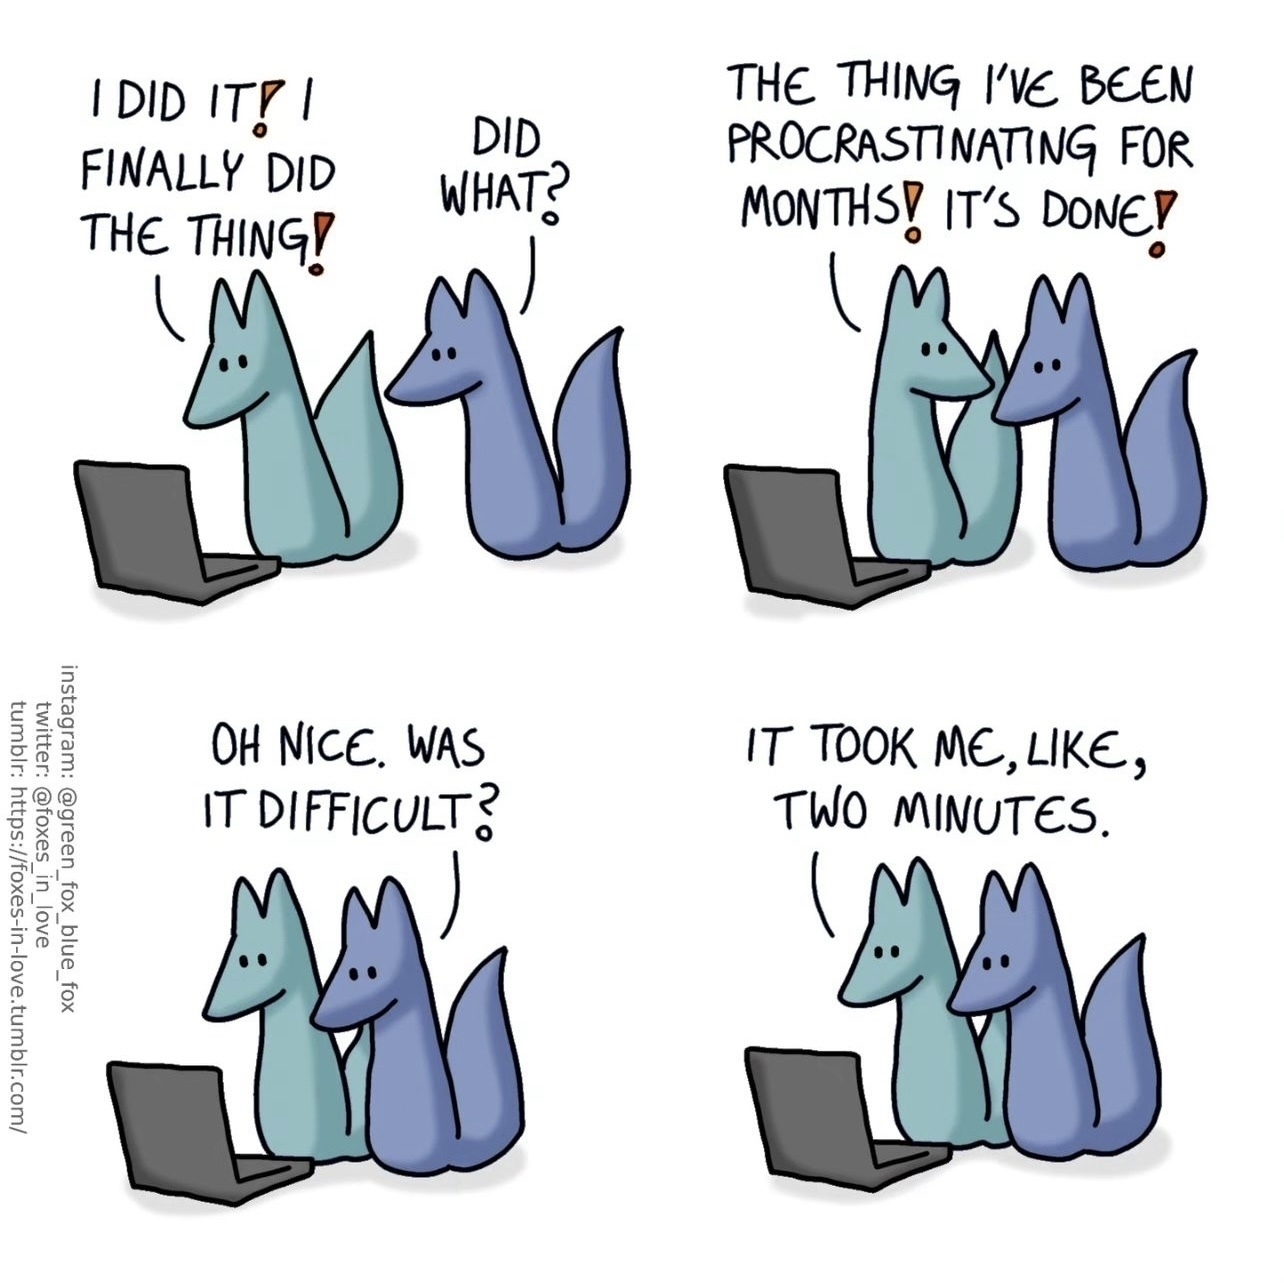 4-panel comic by artist Green Fox Blue Fox: two foxes looking at a laptop screen. The blue fox exclaims that it’s finally finished a task it’s been procrastinating for months. The green fox congratulates them and asks if the task was difficult. The blue fox responds that the task took all of two minutes. 